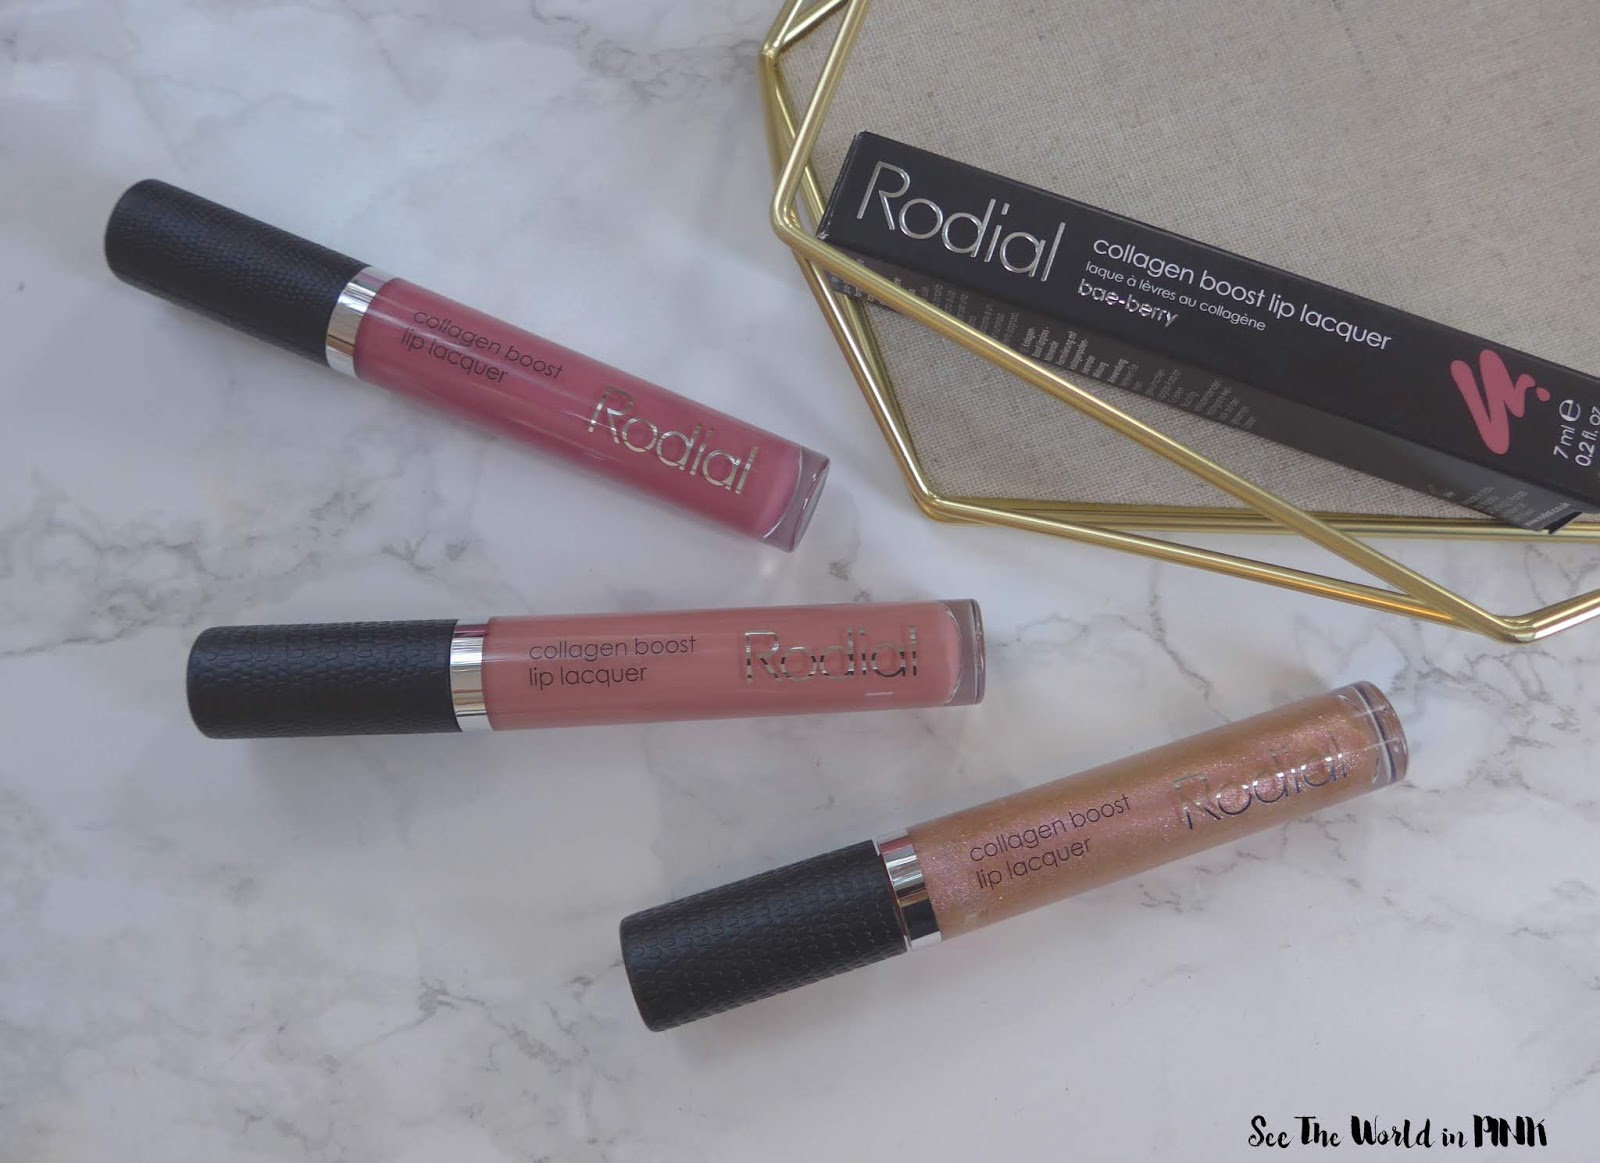 Rodial Collagen Boost Lip Lacquers 